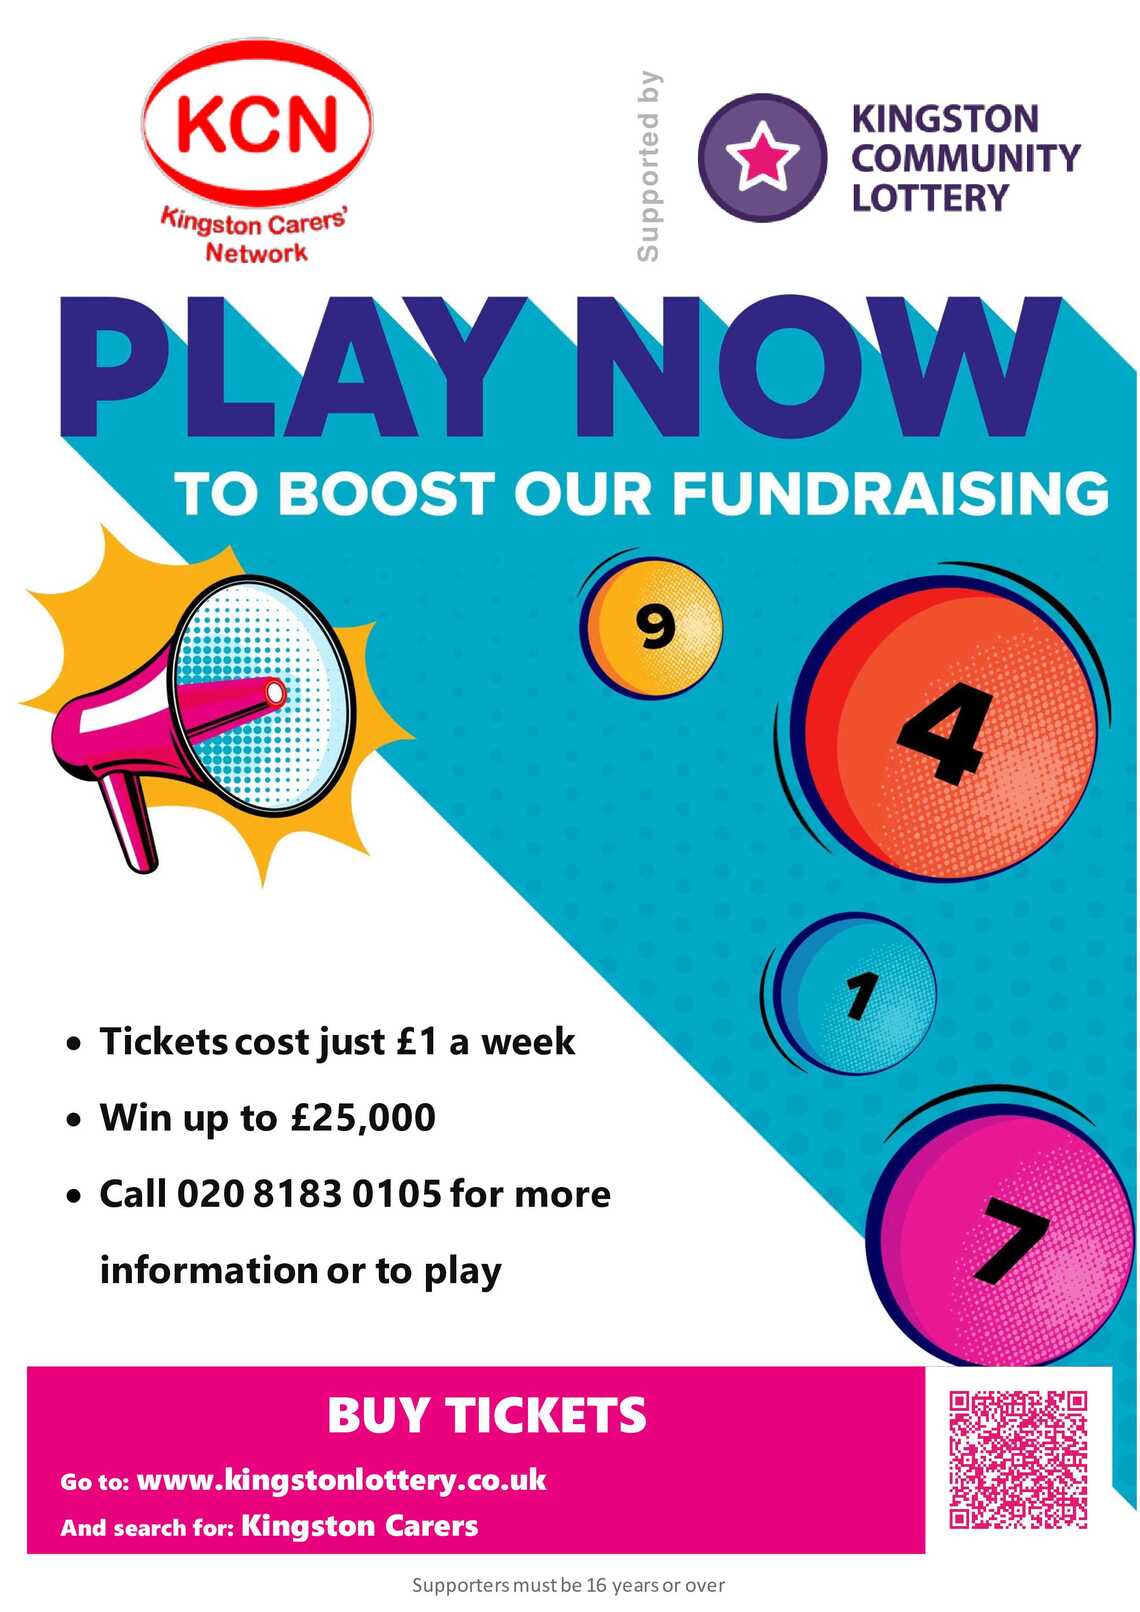 Play now to boost our fundraising. Tickets cost just £1 a week. Win up to £25,000. Call 020 8183 0105 for more information or to play.